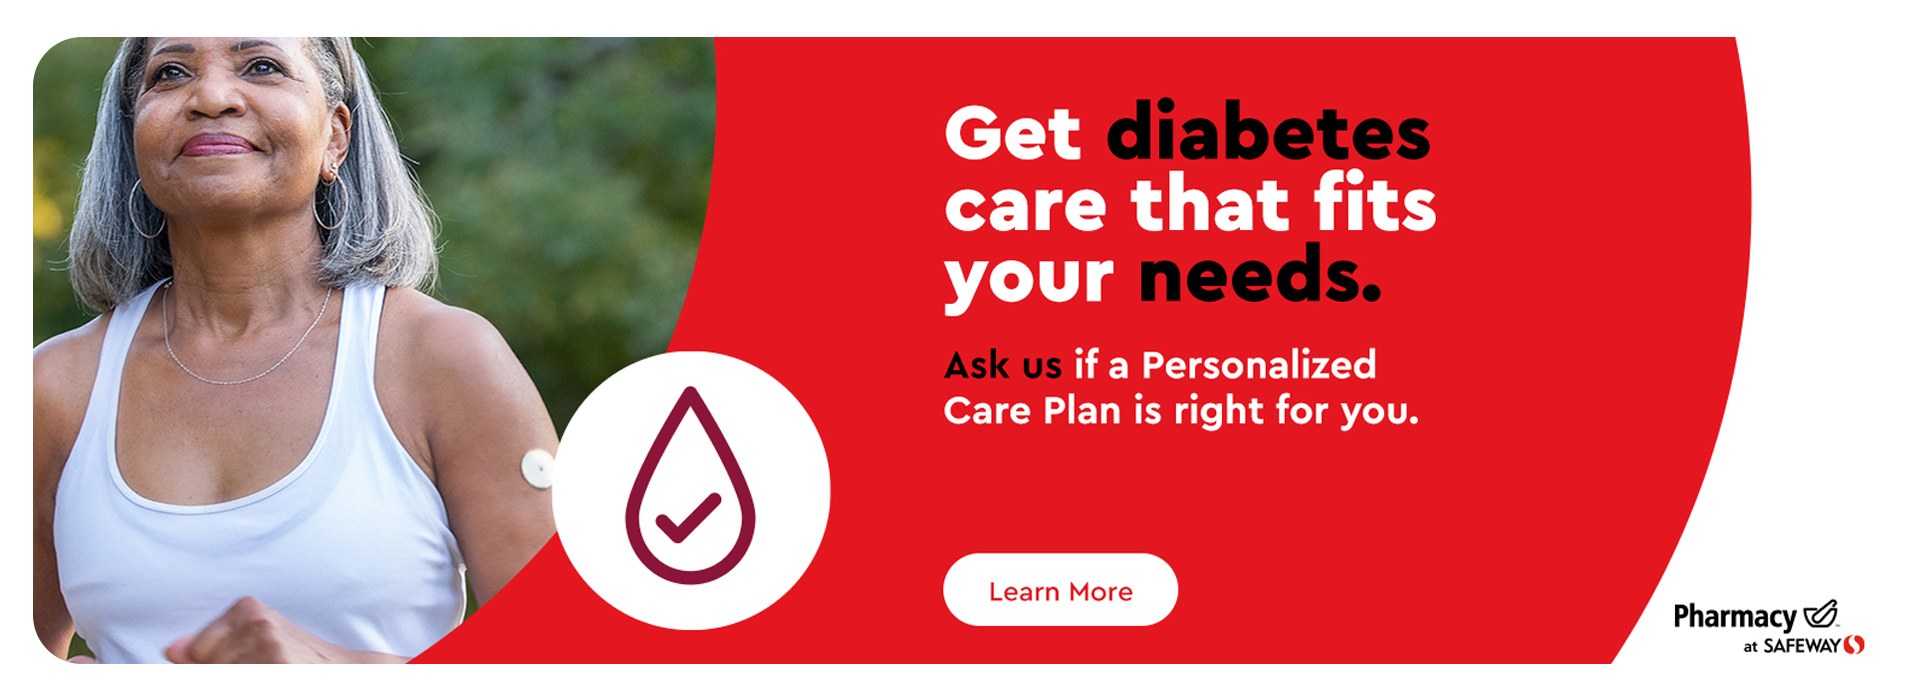 Text Reading 'Get diabetes care that fits your needs at Safeway Pharmacy. Ask us if a Personalized Care Plan is right for you. 'Learn More' by clicking on the button below.'